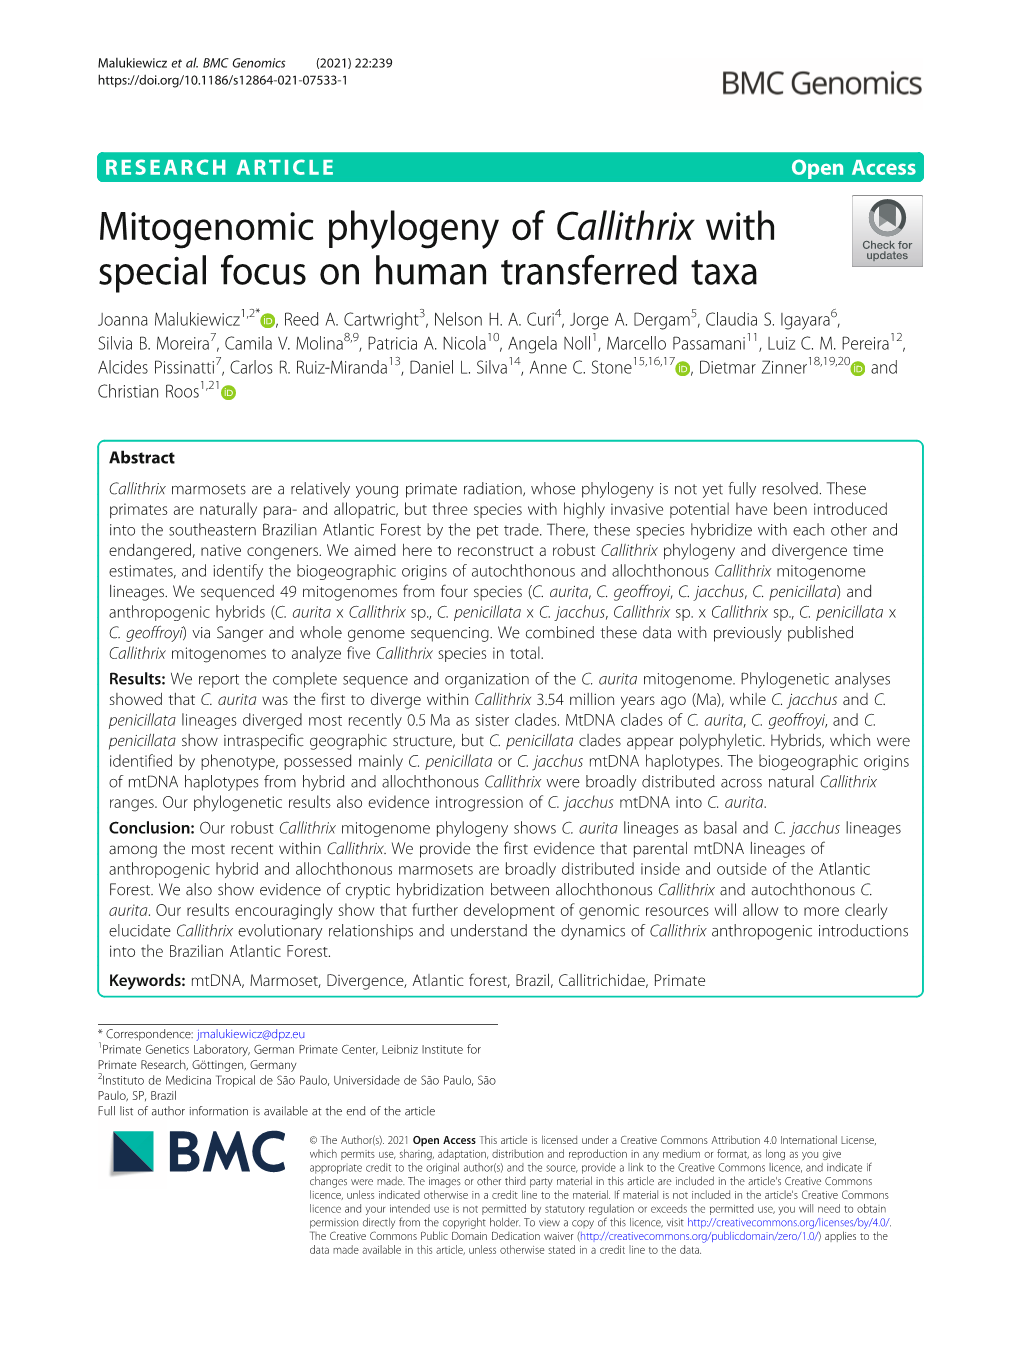 Mitogenomic Phylogeny of Callithrix with Special Focus on Human Transferred Taxa Joanna Malukiewicz1,2* , Reed A